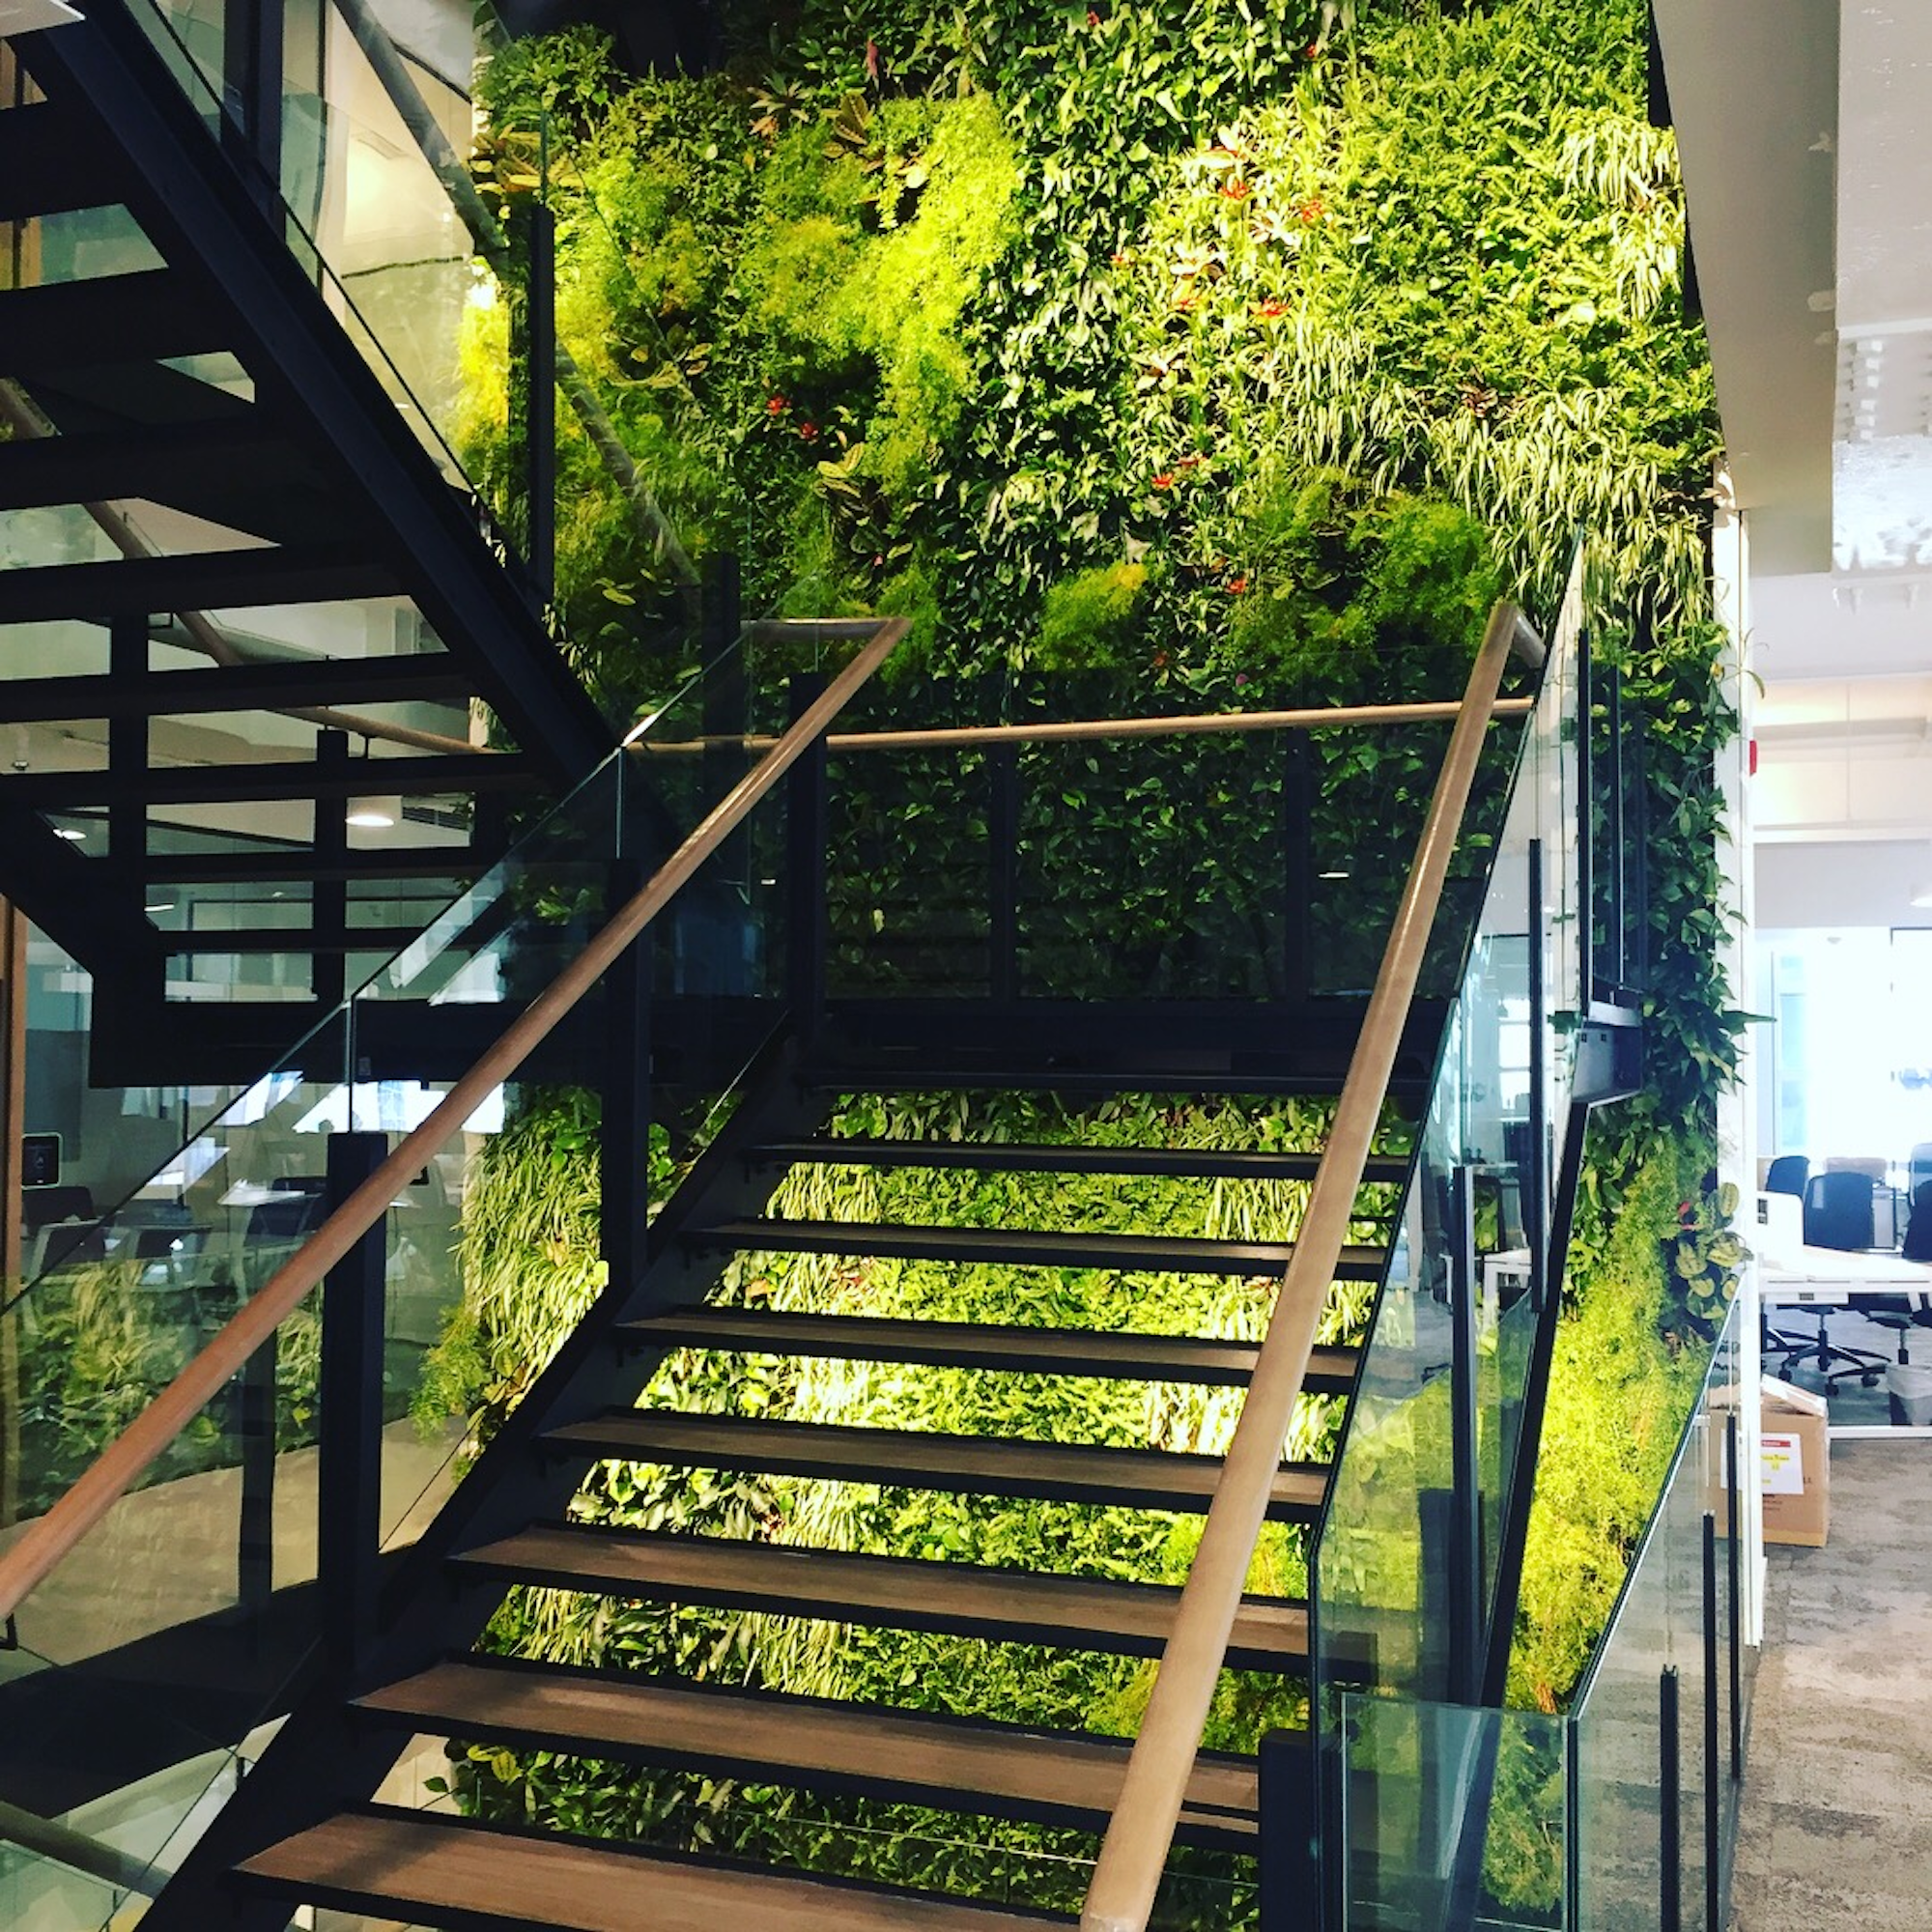 Lit Up Living Wall In The Stairwell At Dubai Property Group